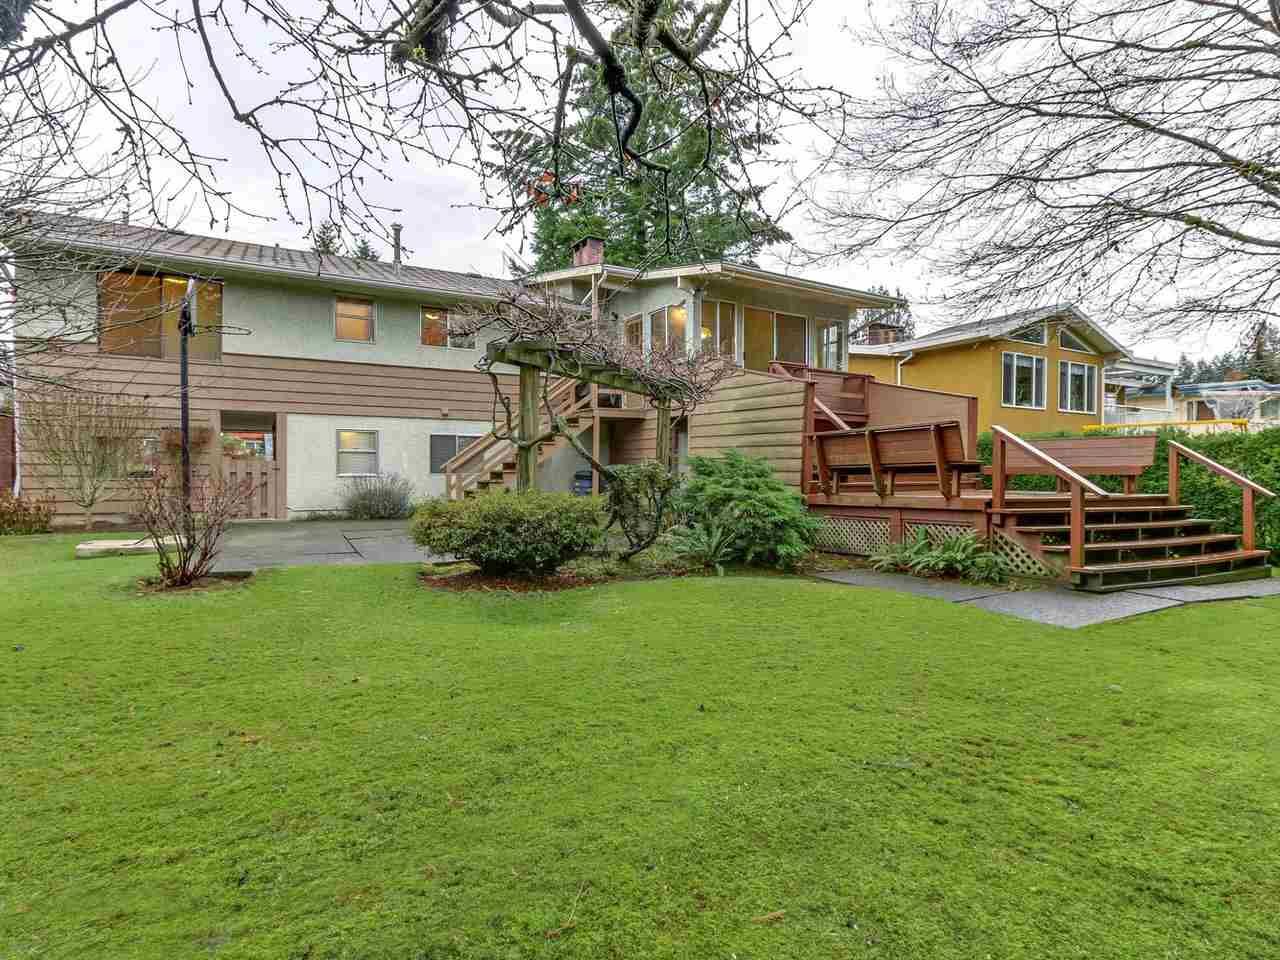 Photo 18: Photos: 1970 ORLAND Drive in Coquitlam: Central Coquitlam House for sale : MLS®# R2330558